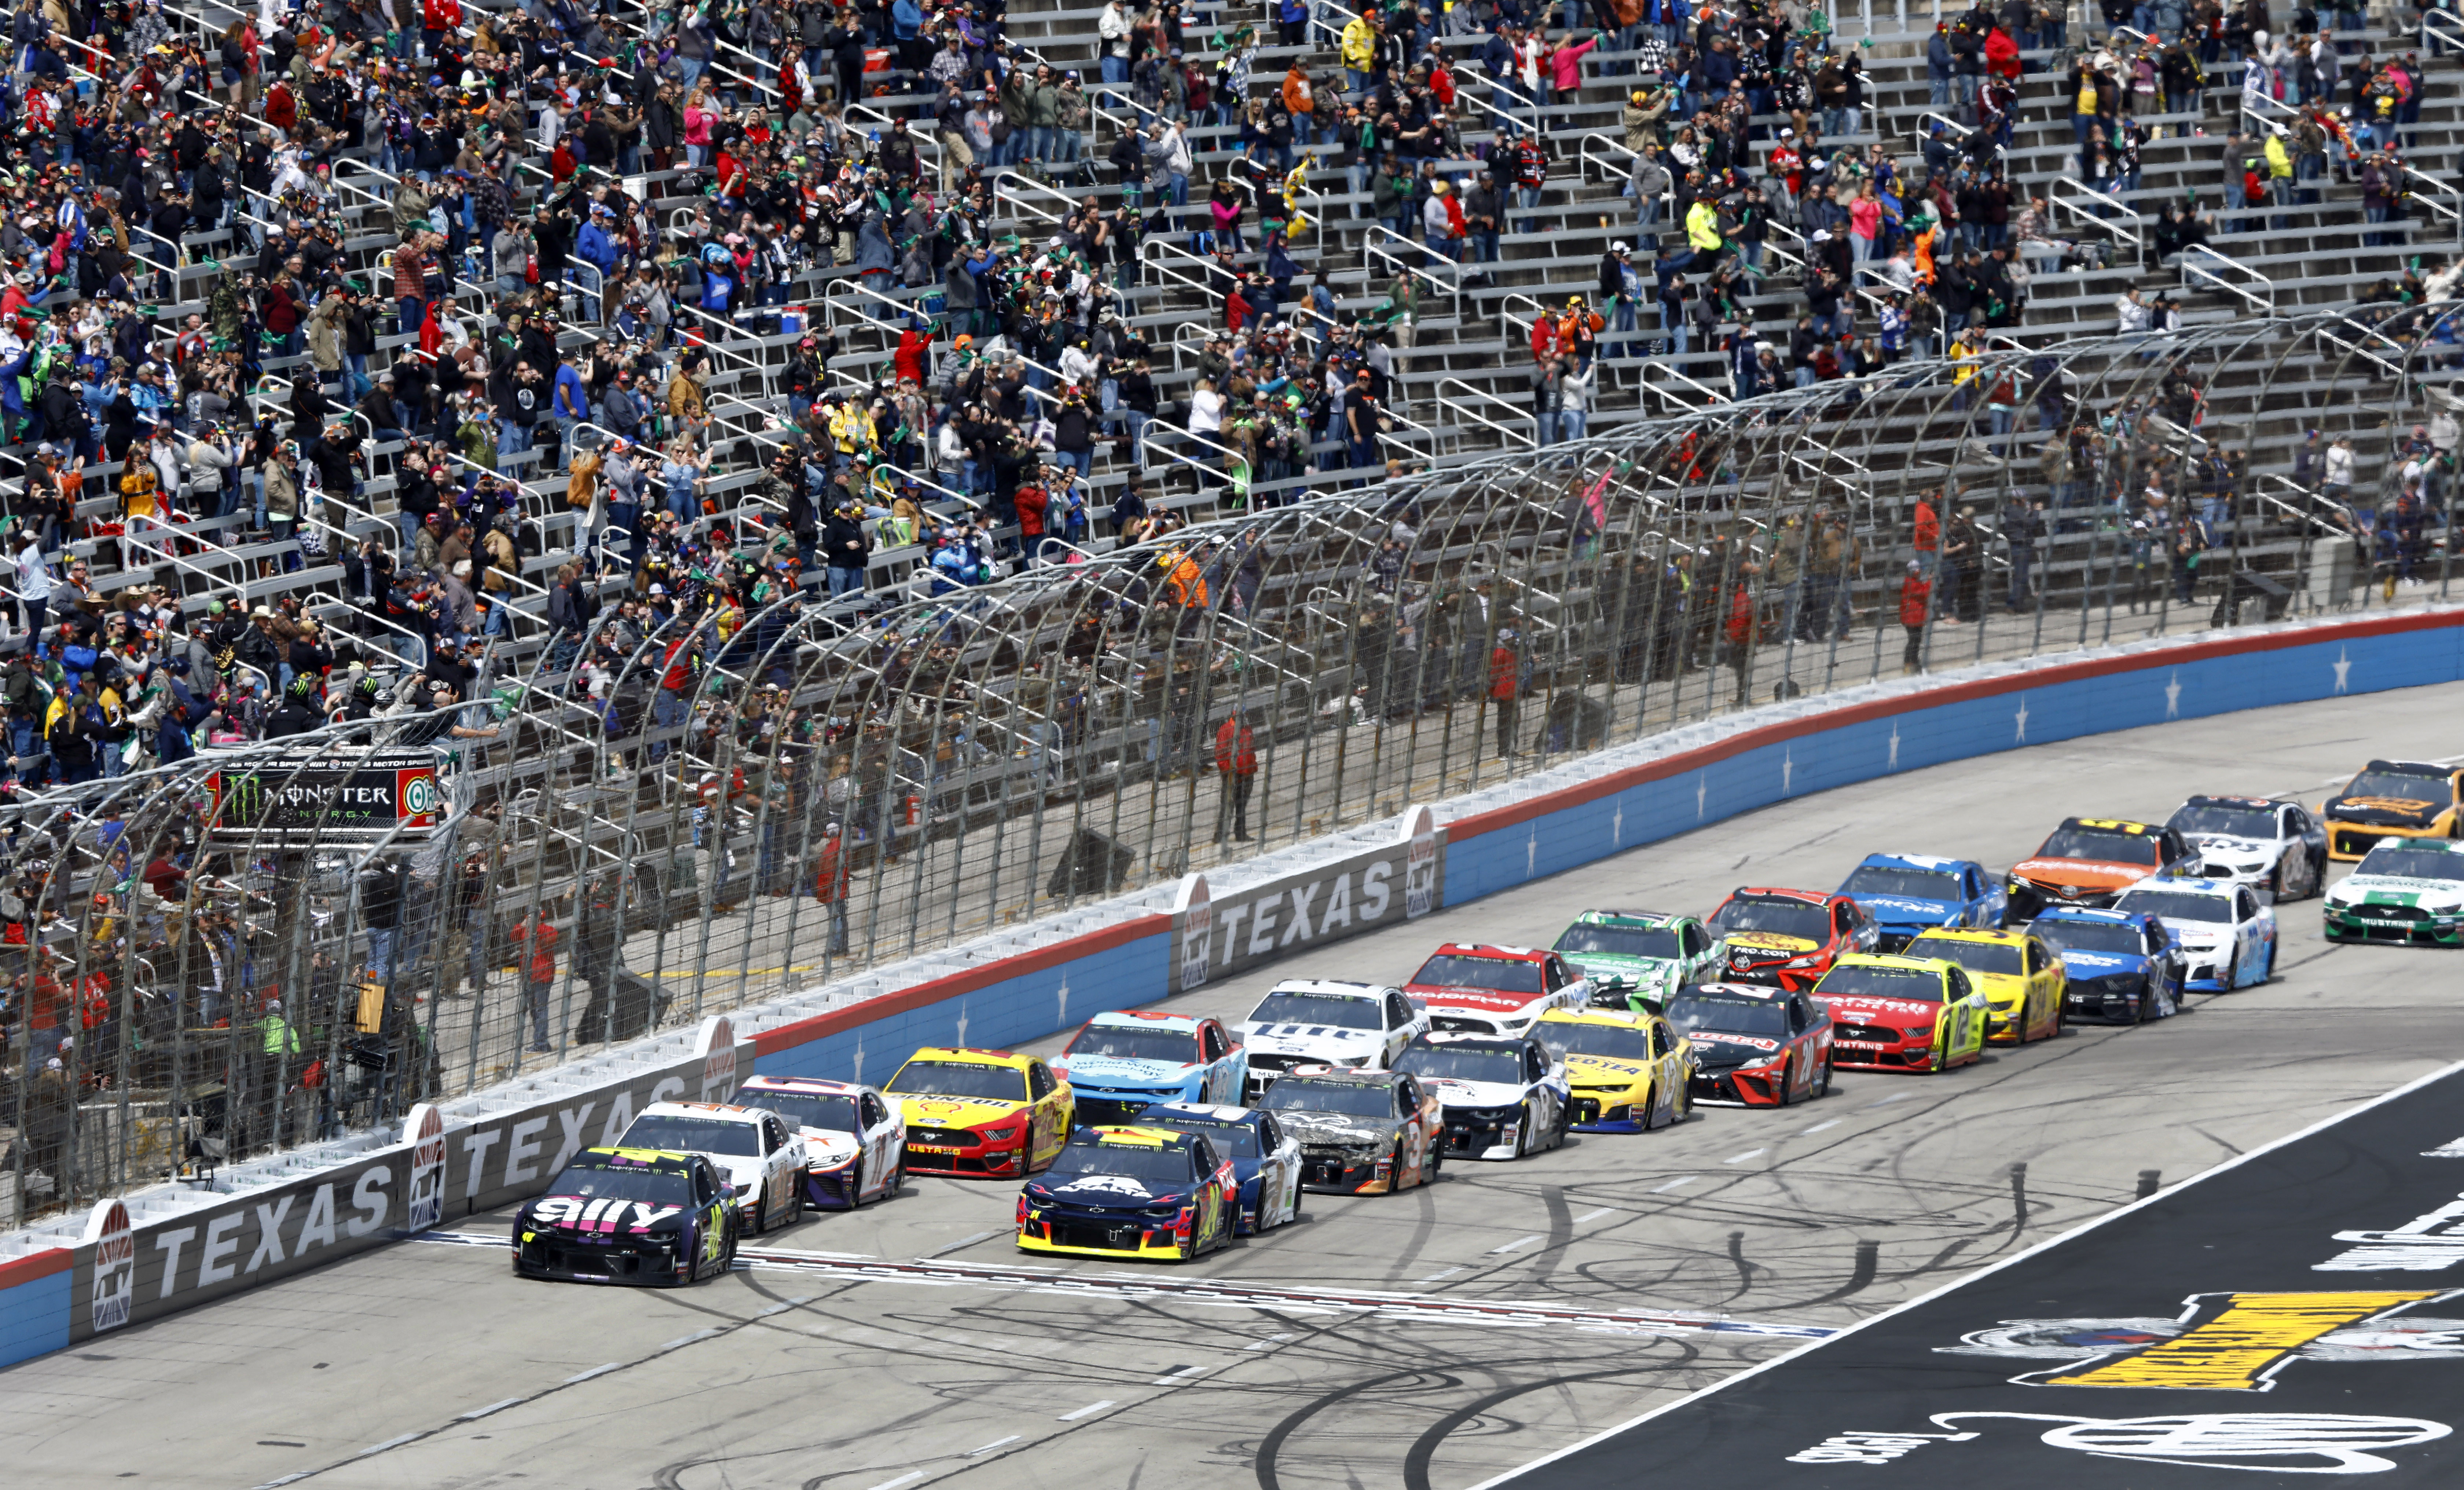 NASCAR Cup Series drivers gear up for a miserably hot OReilly Auto Parts 500 at Texas Motor Speedway